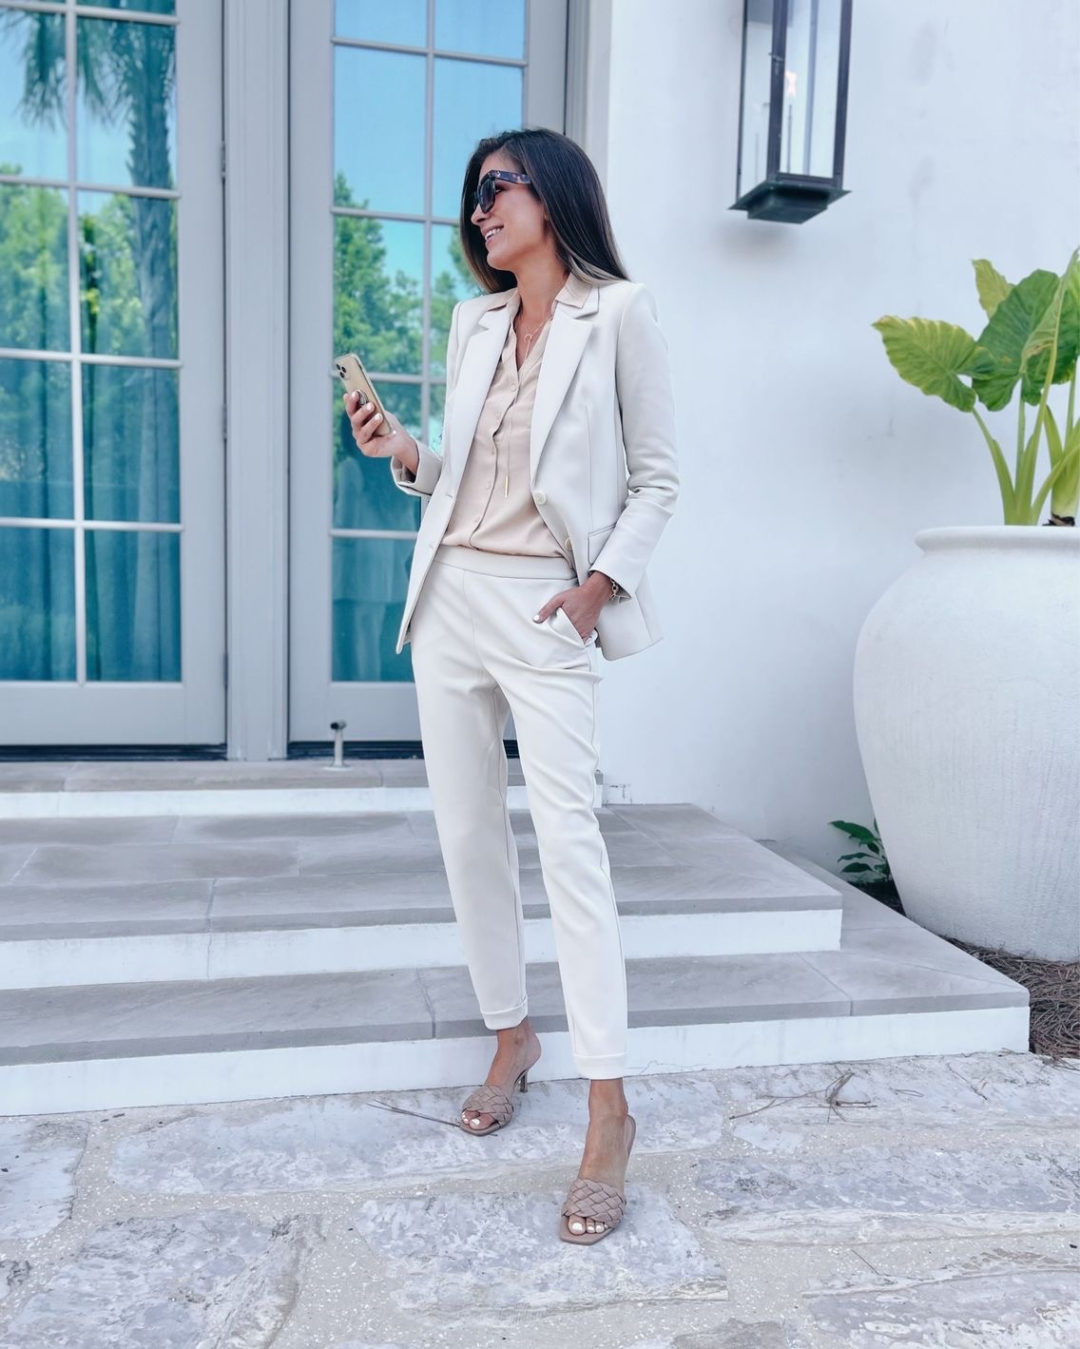 matching off white blazer and pants work outfit 2021